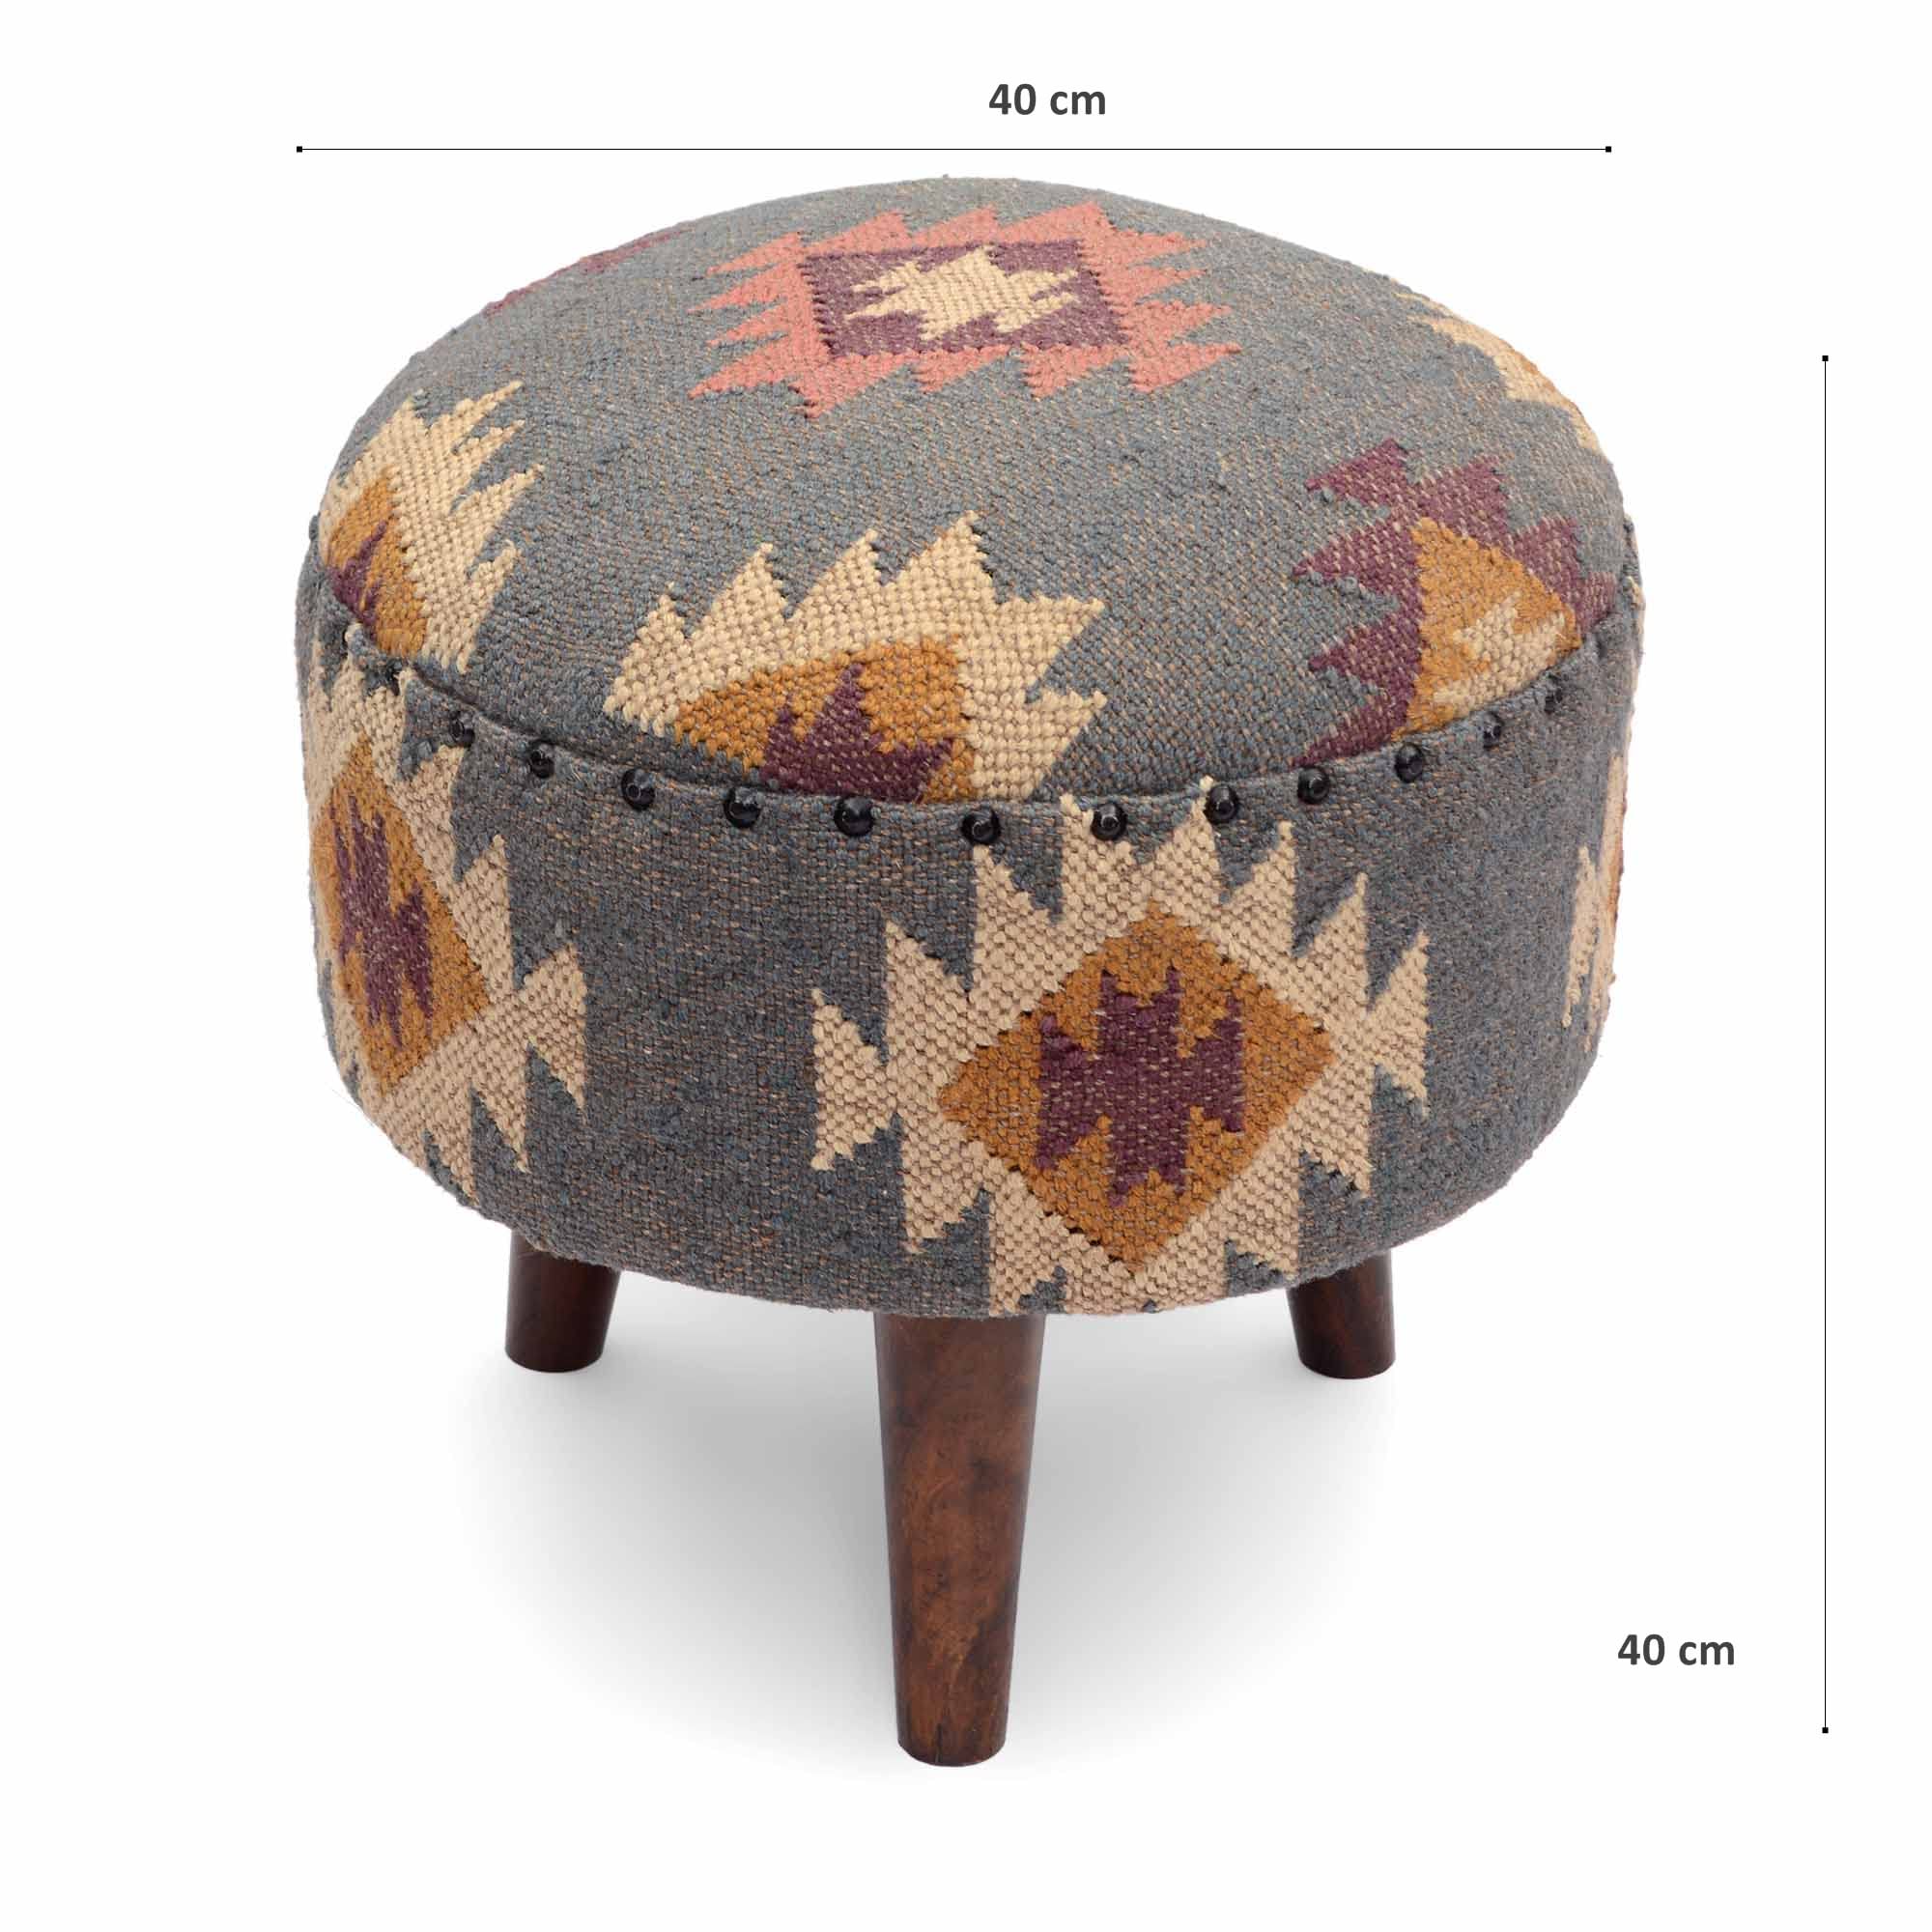 NATURAL FURNISH Handmade Kilim Jute Pouf Ottomans Wooden Seating Stool for Living Room, Bedroom (16" D x 16" W x 16" H) (Grey)